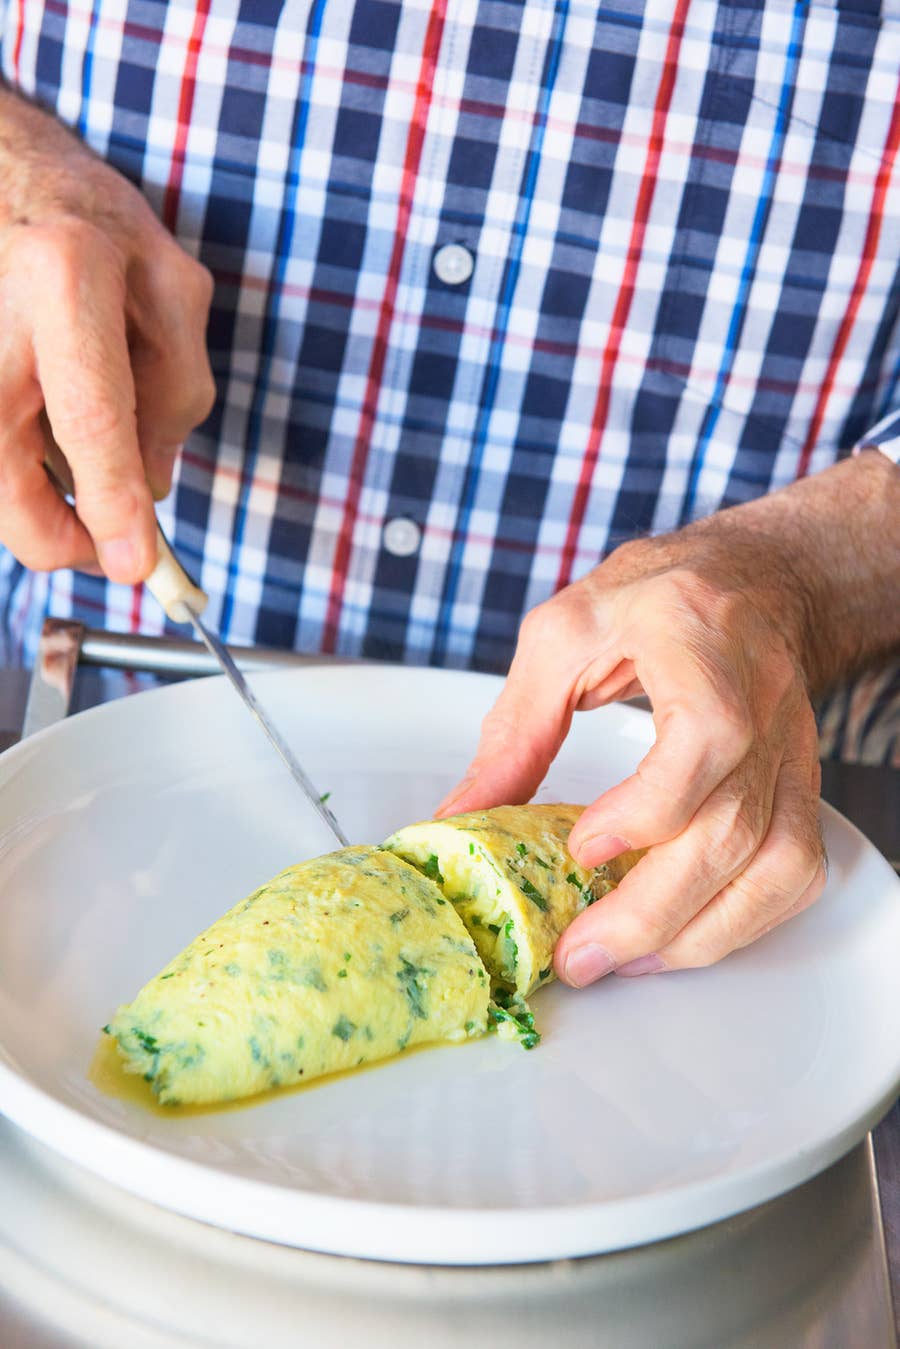 french omelette - The Culinary Chase